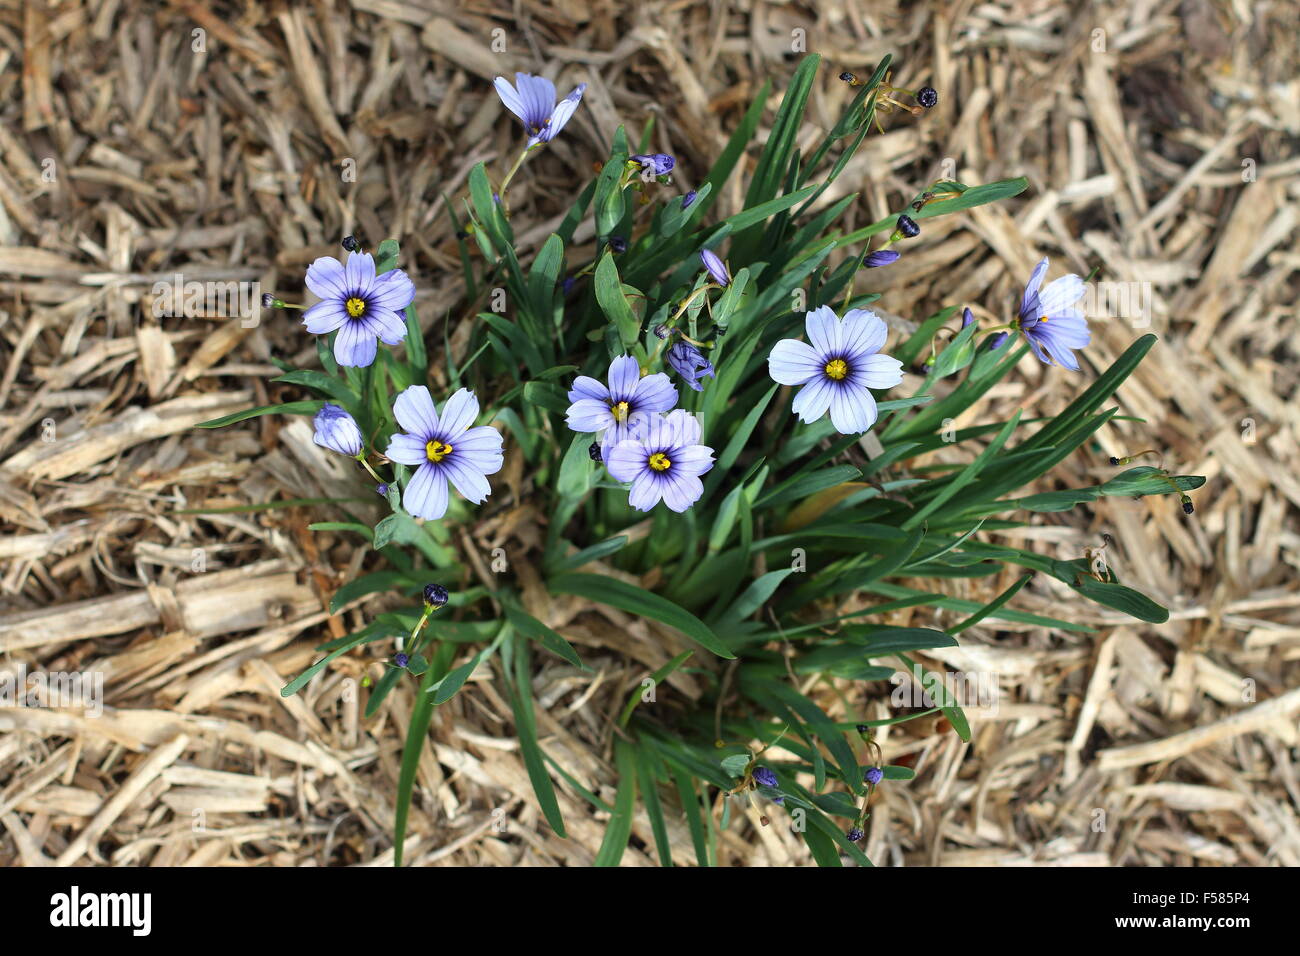 Sisyrinchium bellum or also known as Blue-Eyed Grass planted on the ground Stock Photo